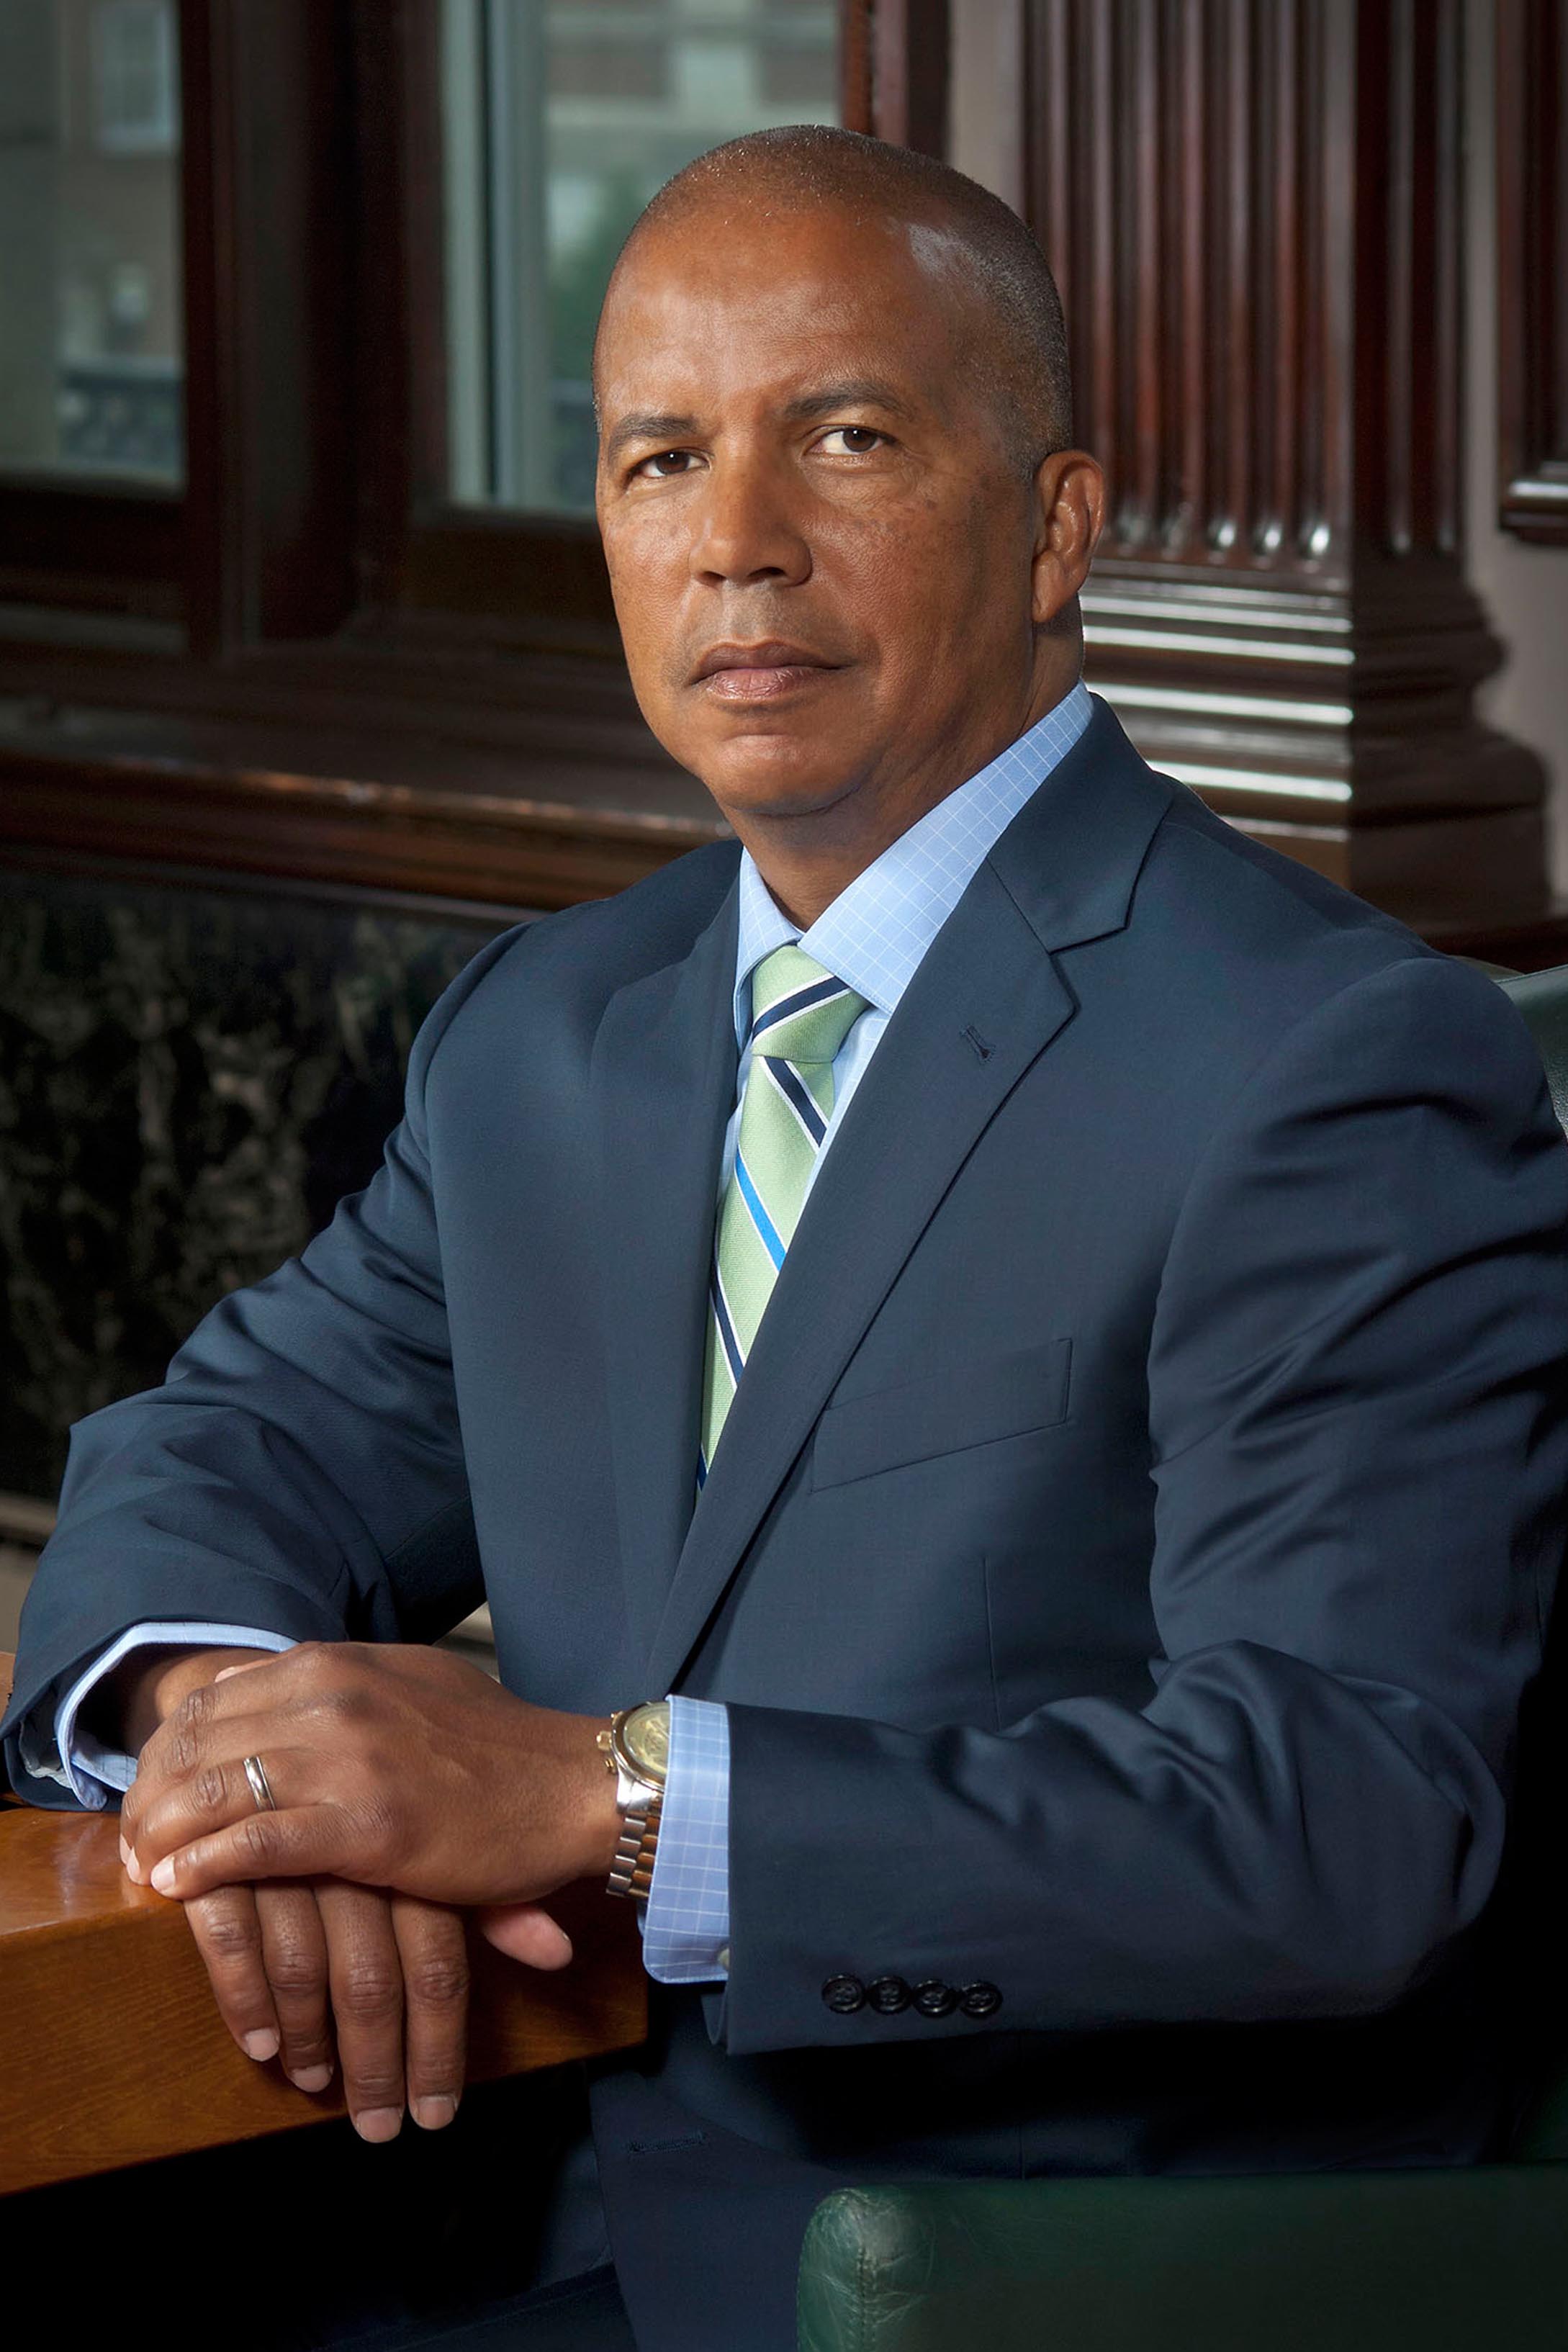 Dr. Donald Generals, the sixth president of Community College of Philadelphia